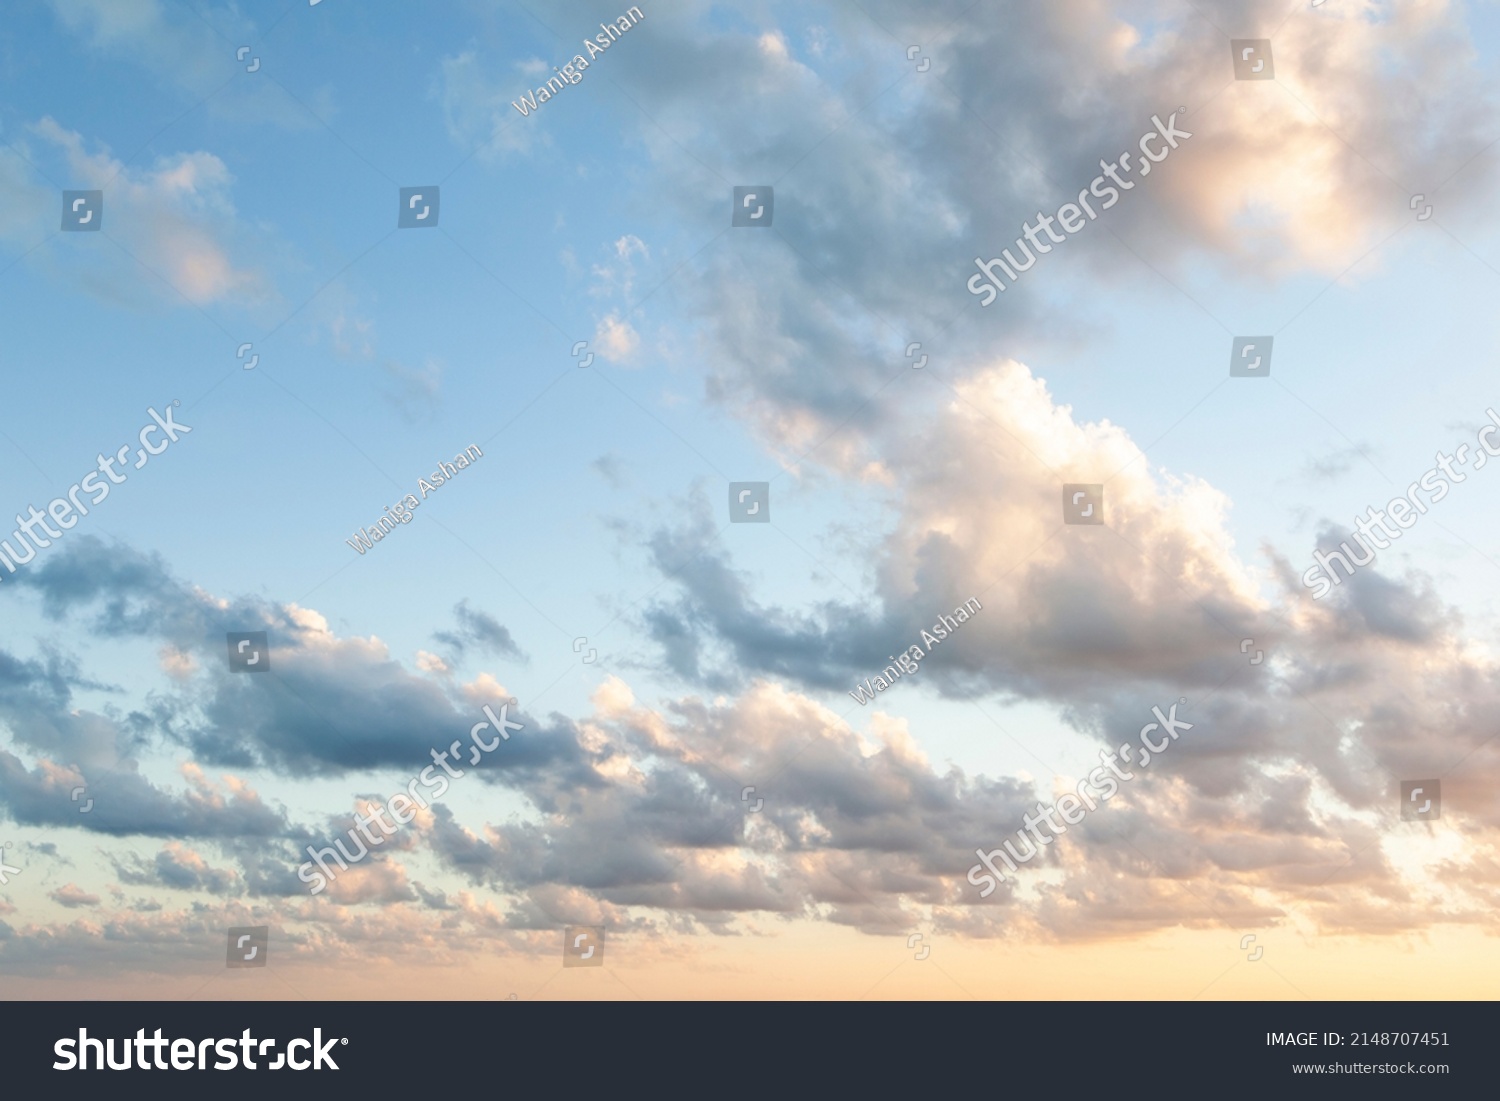 Sunset on blue sky. Blue sky with some clouds. blue sky clouds, summer skies, cloudy blue sky background. Aerial sunset view.  Evening skies with dramatic clouds. View over the clouds. #2148707451